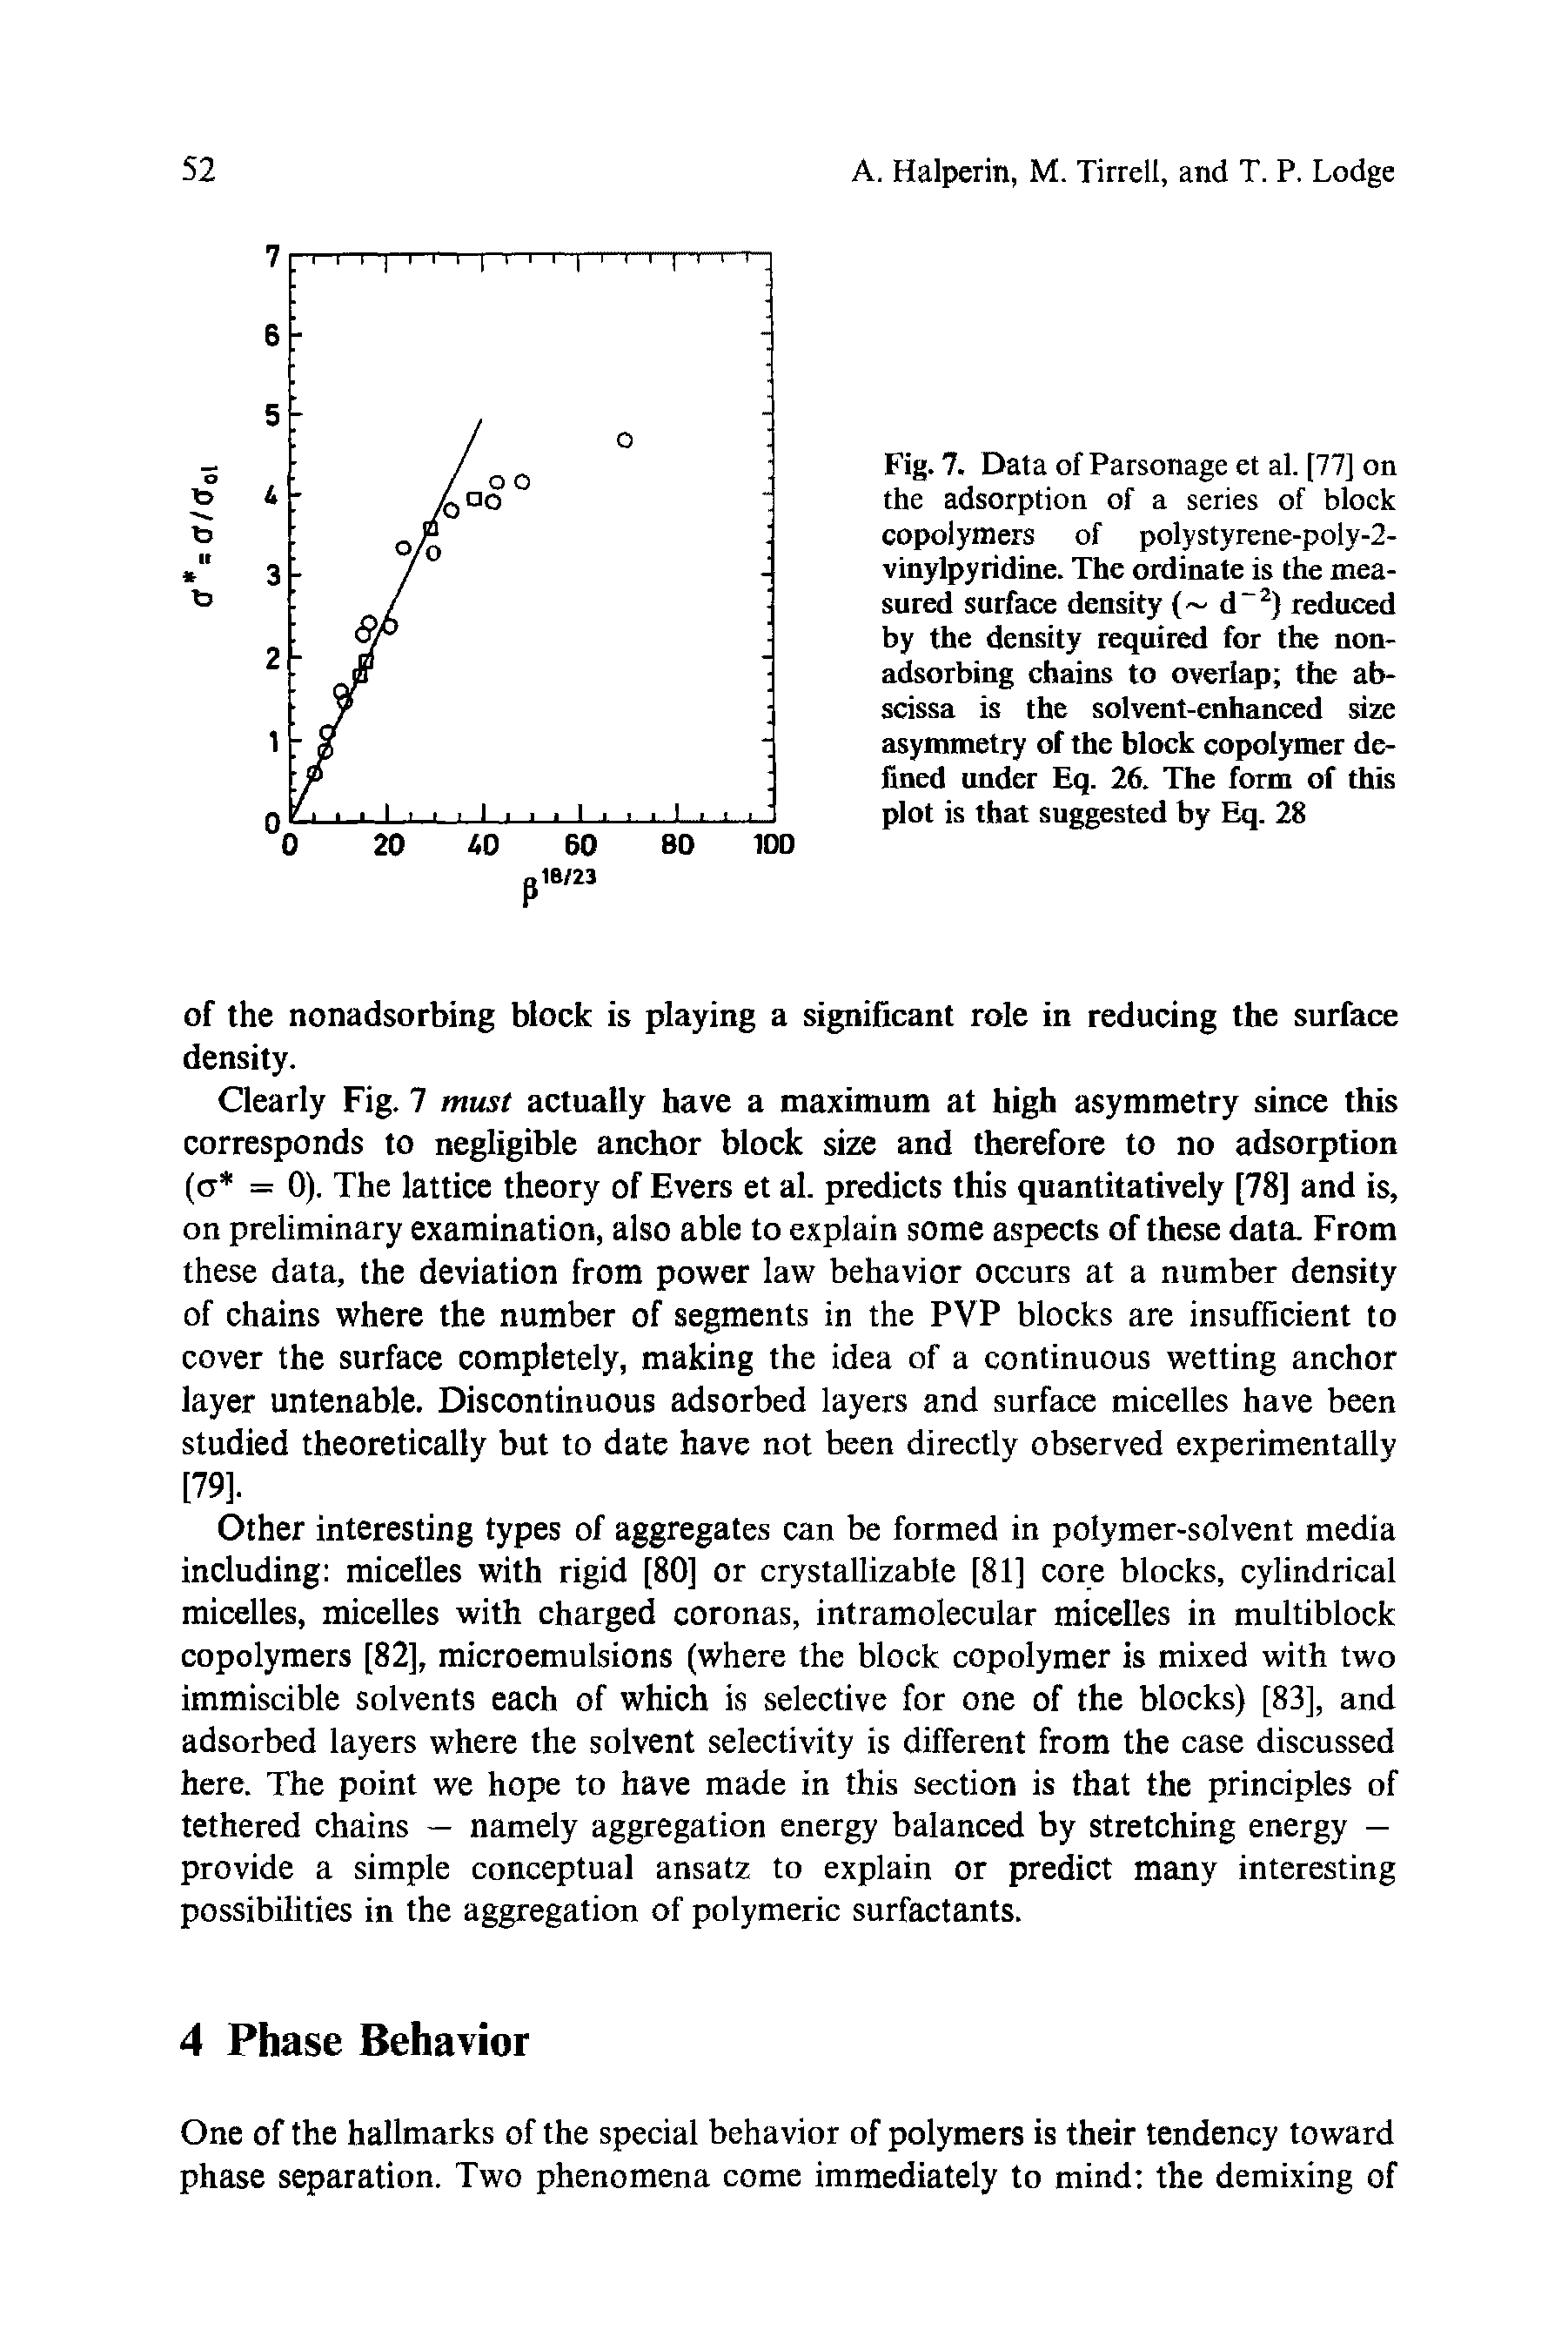 Fig. 7. Data of Parsonage et al. [77] on the adsorption of a series of block copolymers of polystyrene-poly-2-vinylpyridine. The ordinate is the measured surface density ( d 2) reduced by the density required for the nonadsorbing chains to overlap the abscissa is the solvent-enhanced size asymmetry of the block copolymer defined under Eq. 26. The form of this plot is that suggested by Eq. 28...